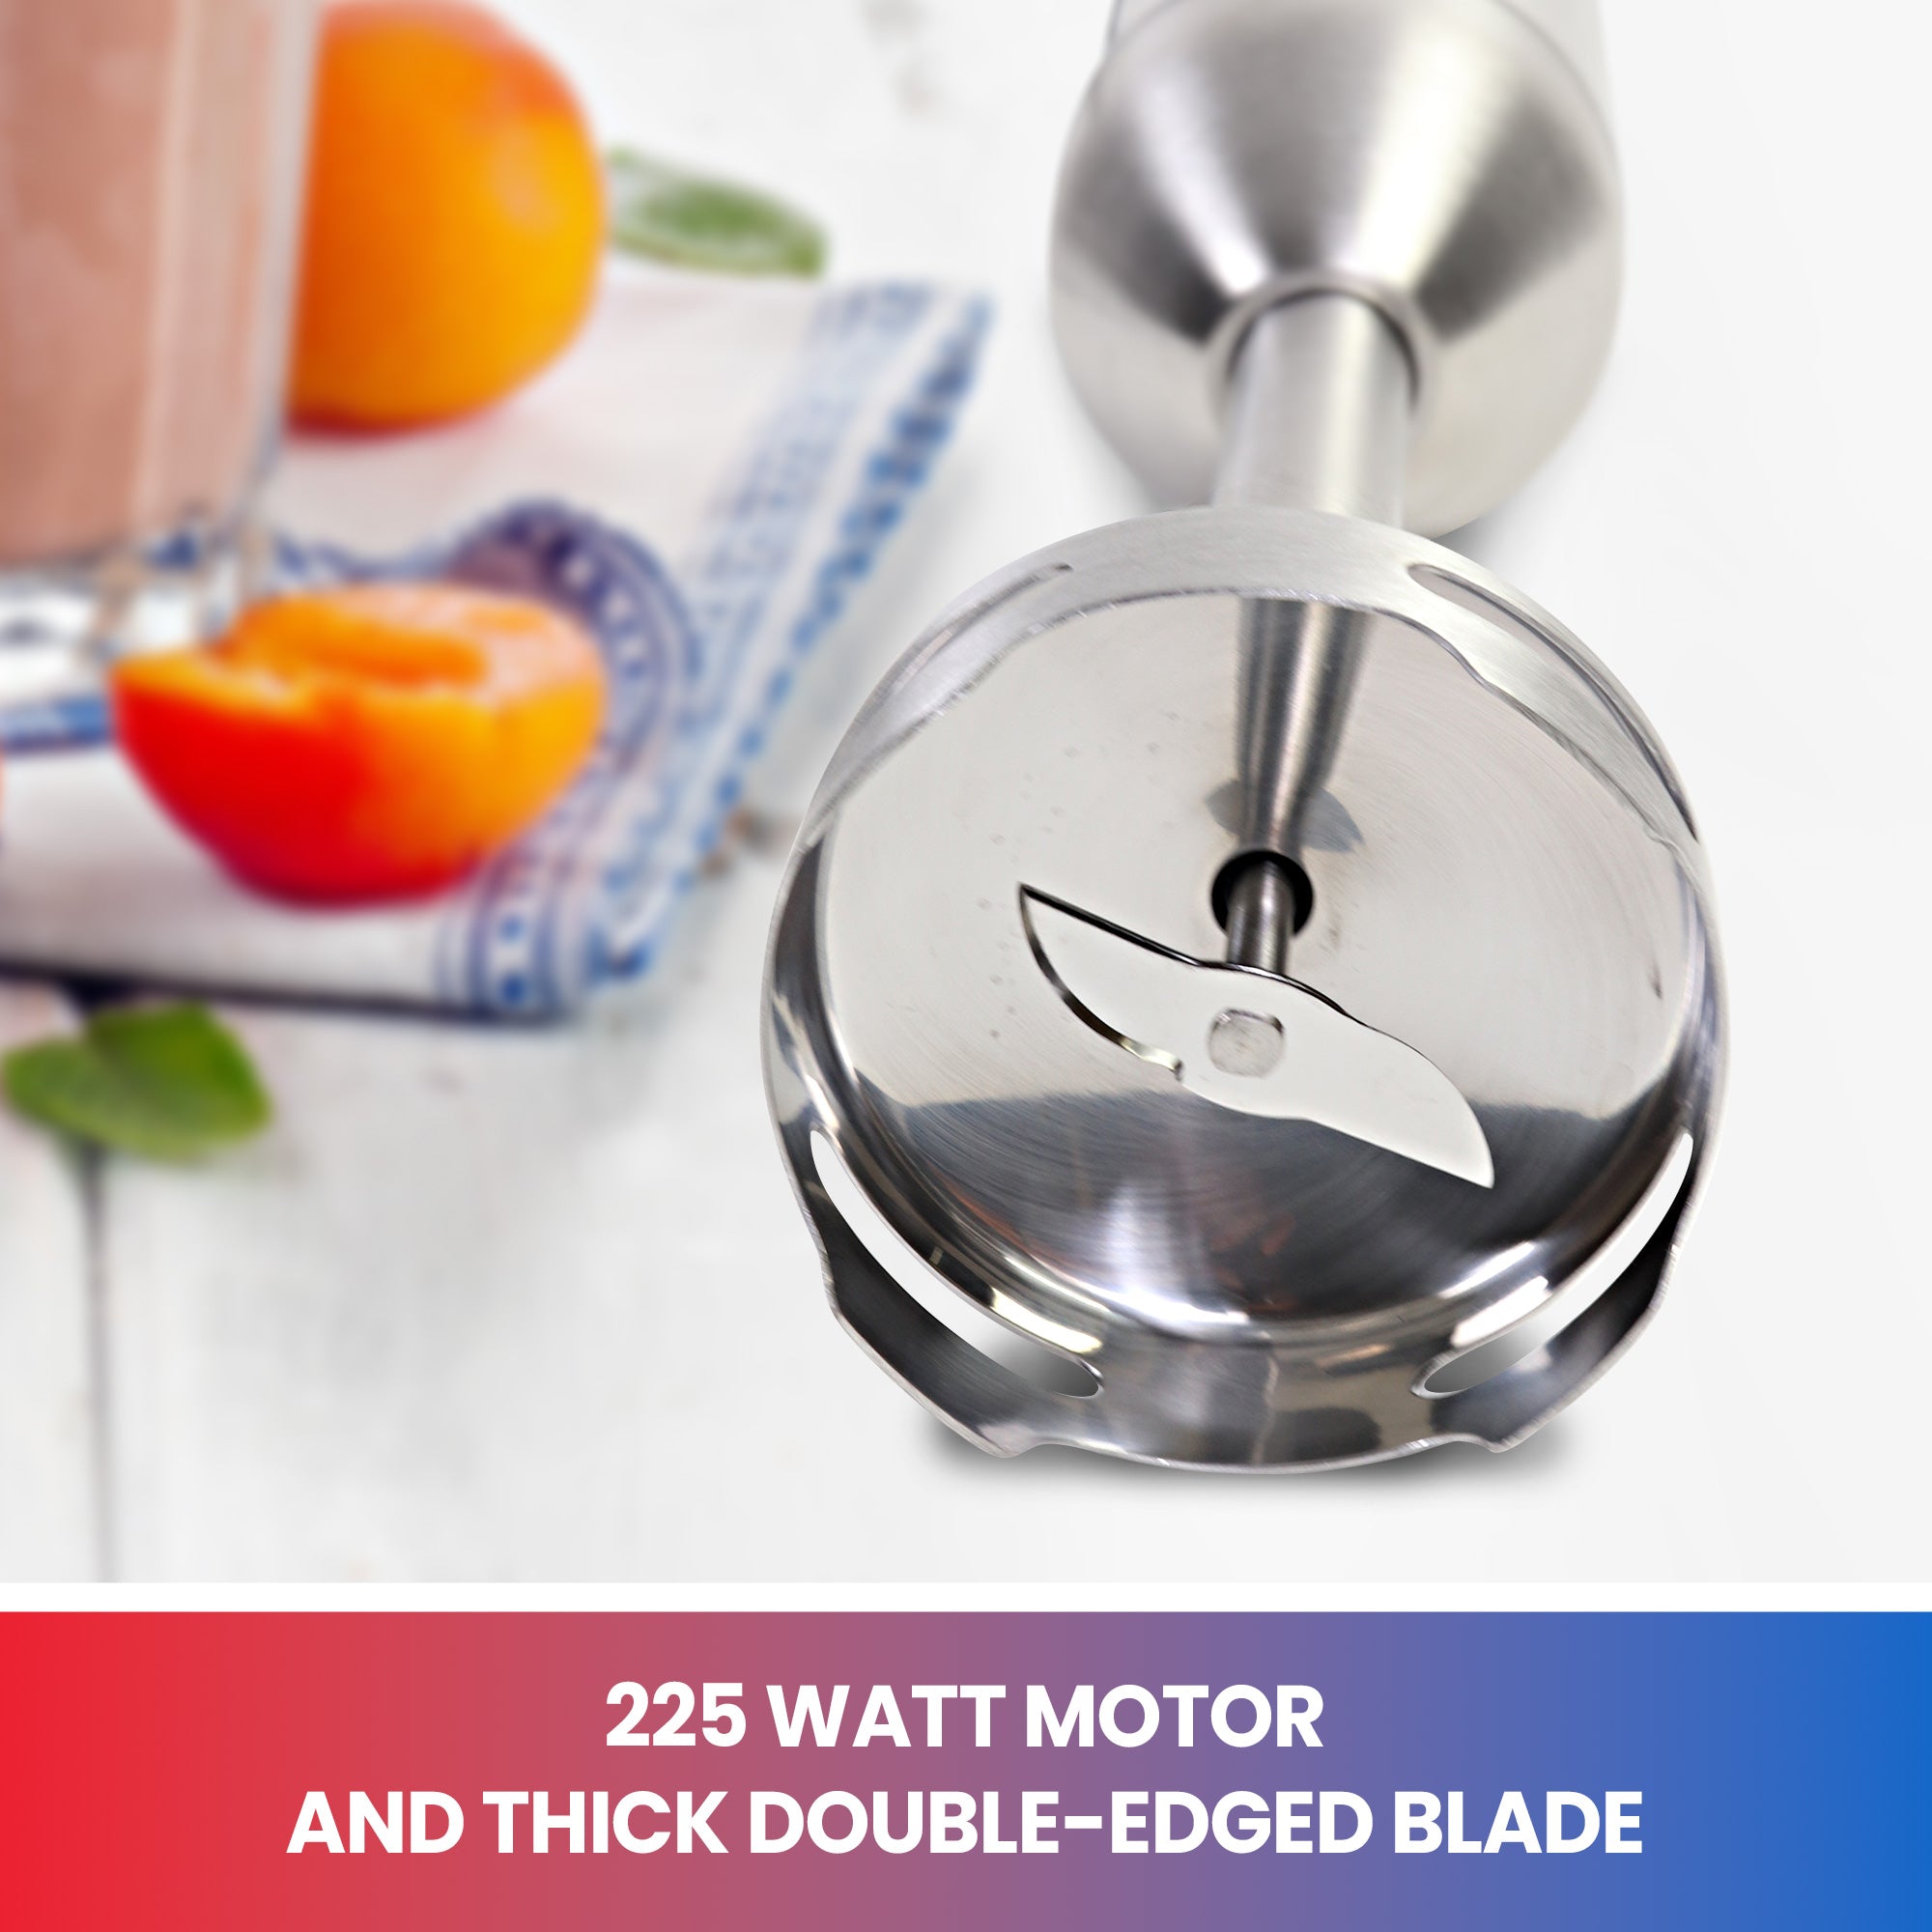 Lifestyle image showing closeup of blender blade on white counter with peaches and glass in background. Text below reads "225 watt motor and thick double-edged blade"